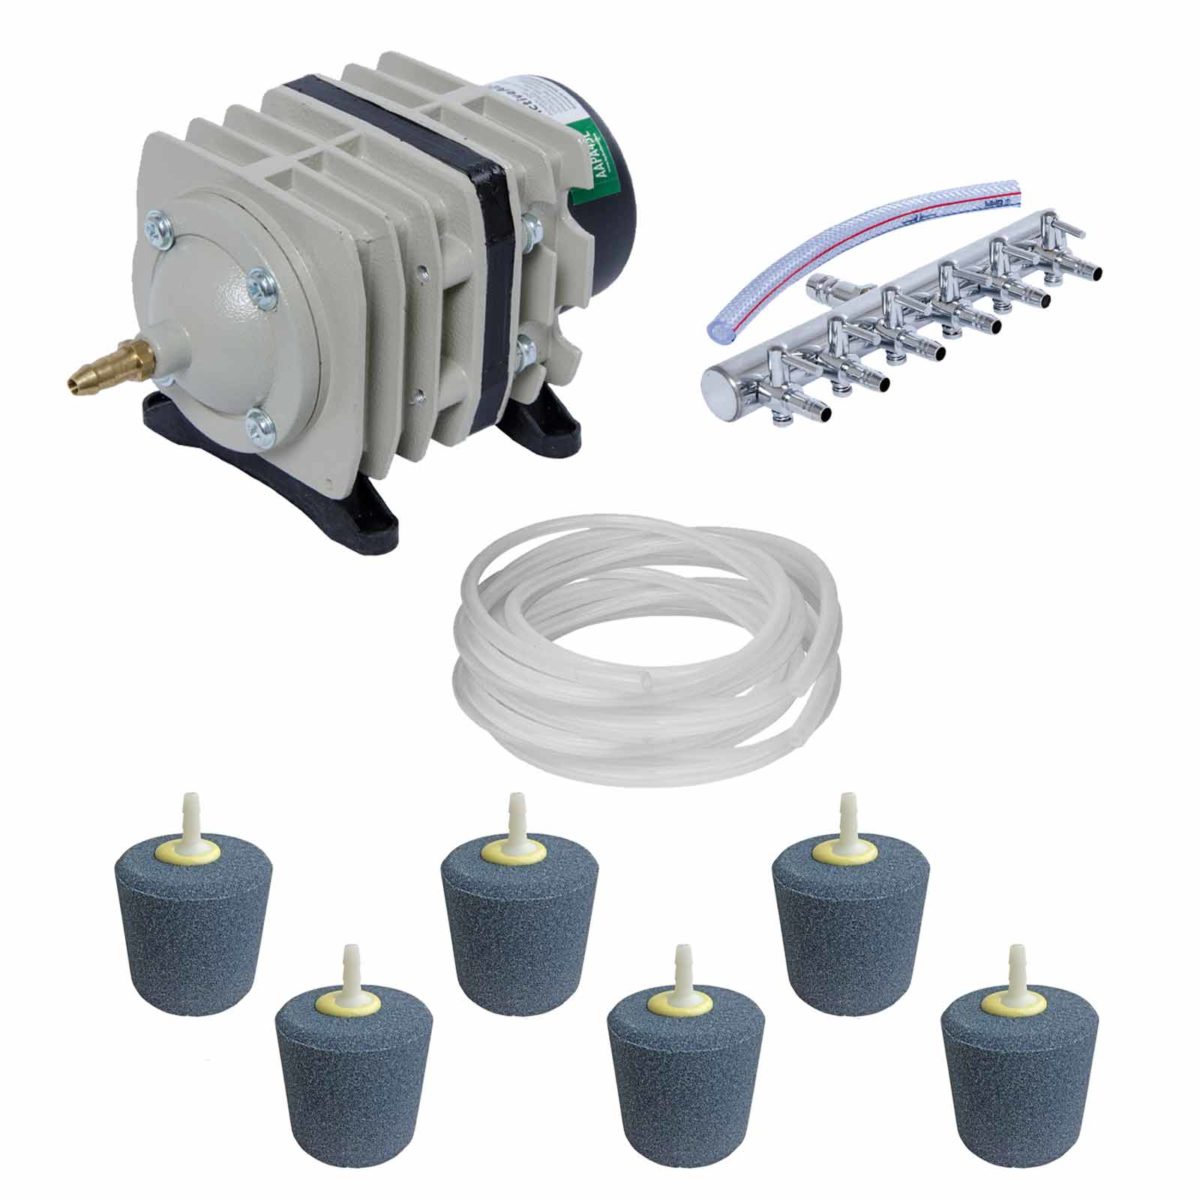 An AquaAeration Kit with 6 Outlet TAS pump and hoses, ideal for fish tanks.